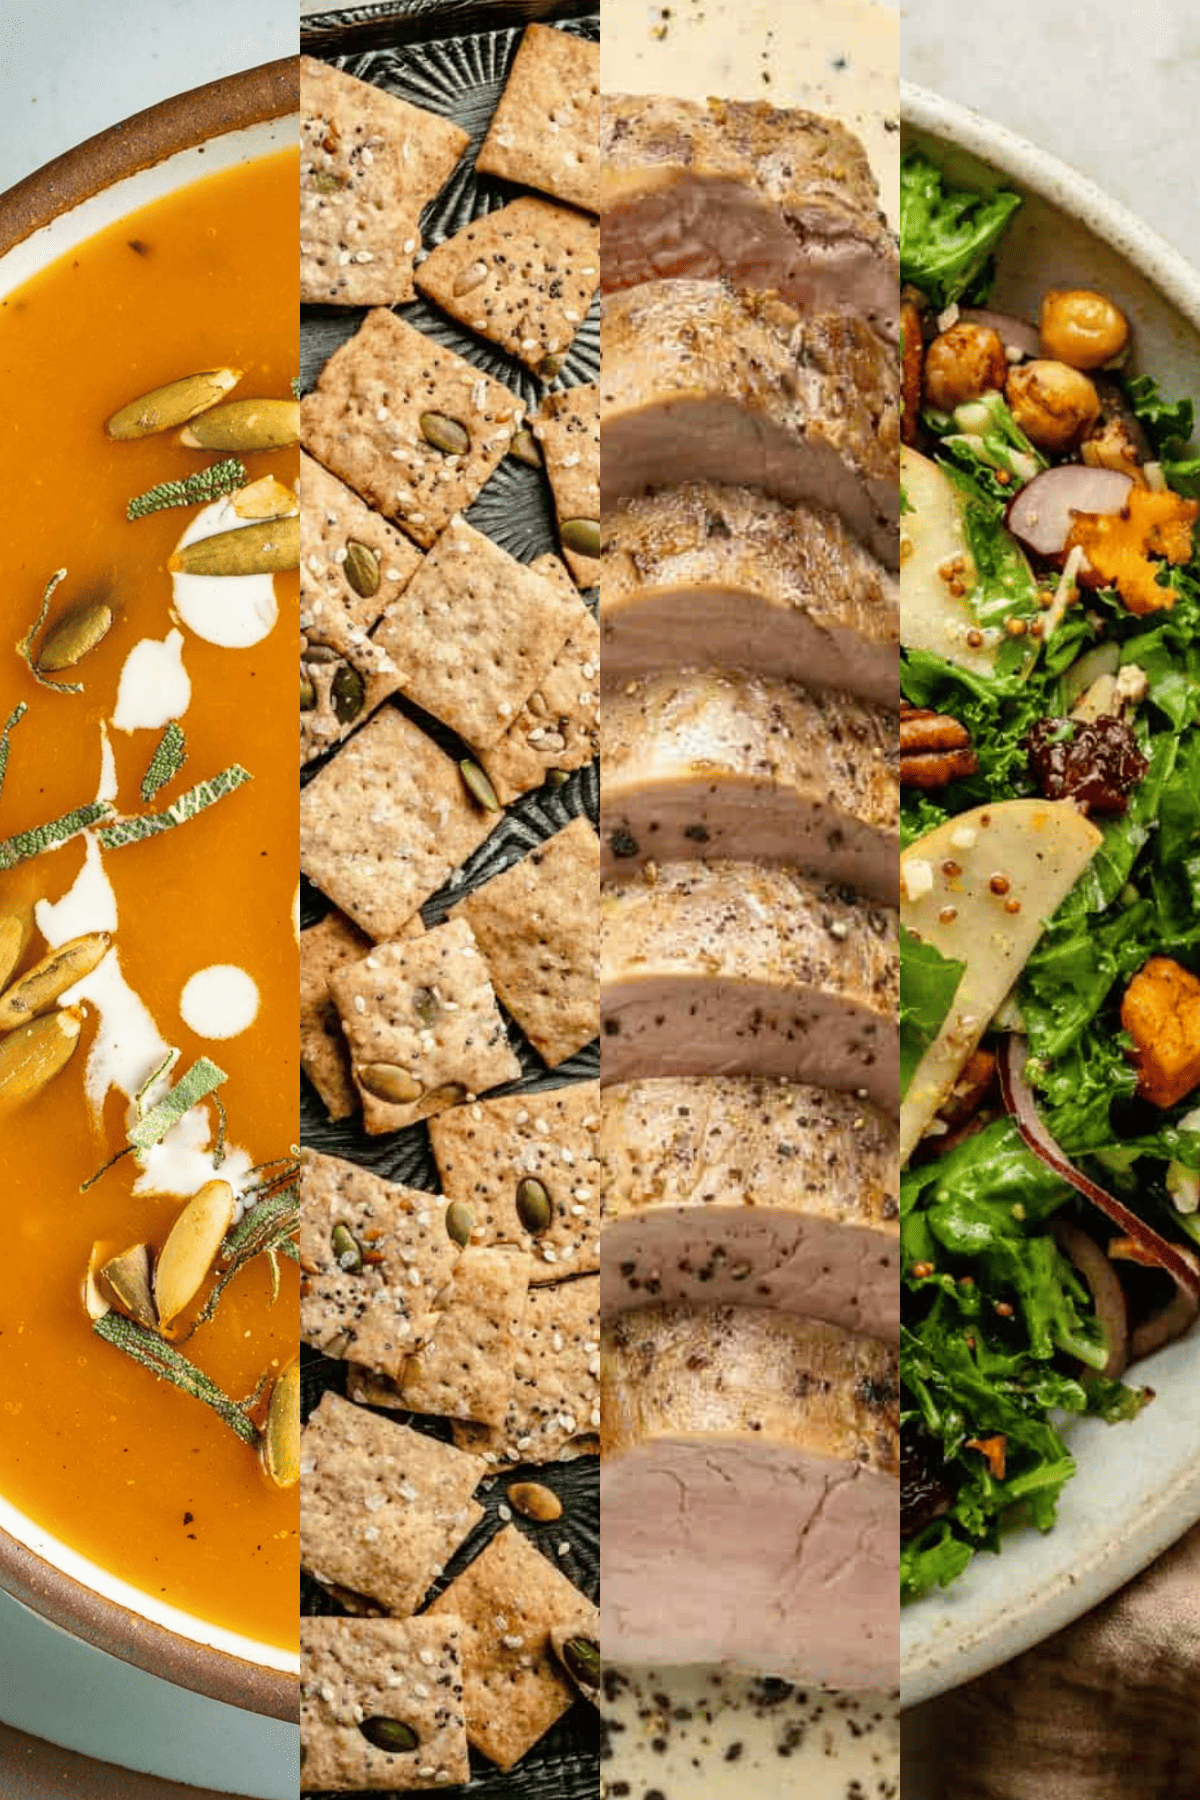 A collage of butternut squash soup, crackers, pork loin, and salad.